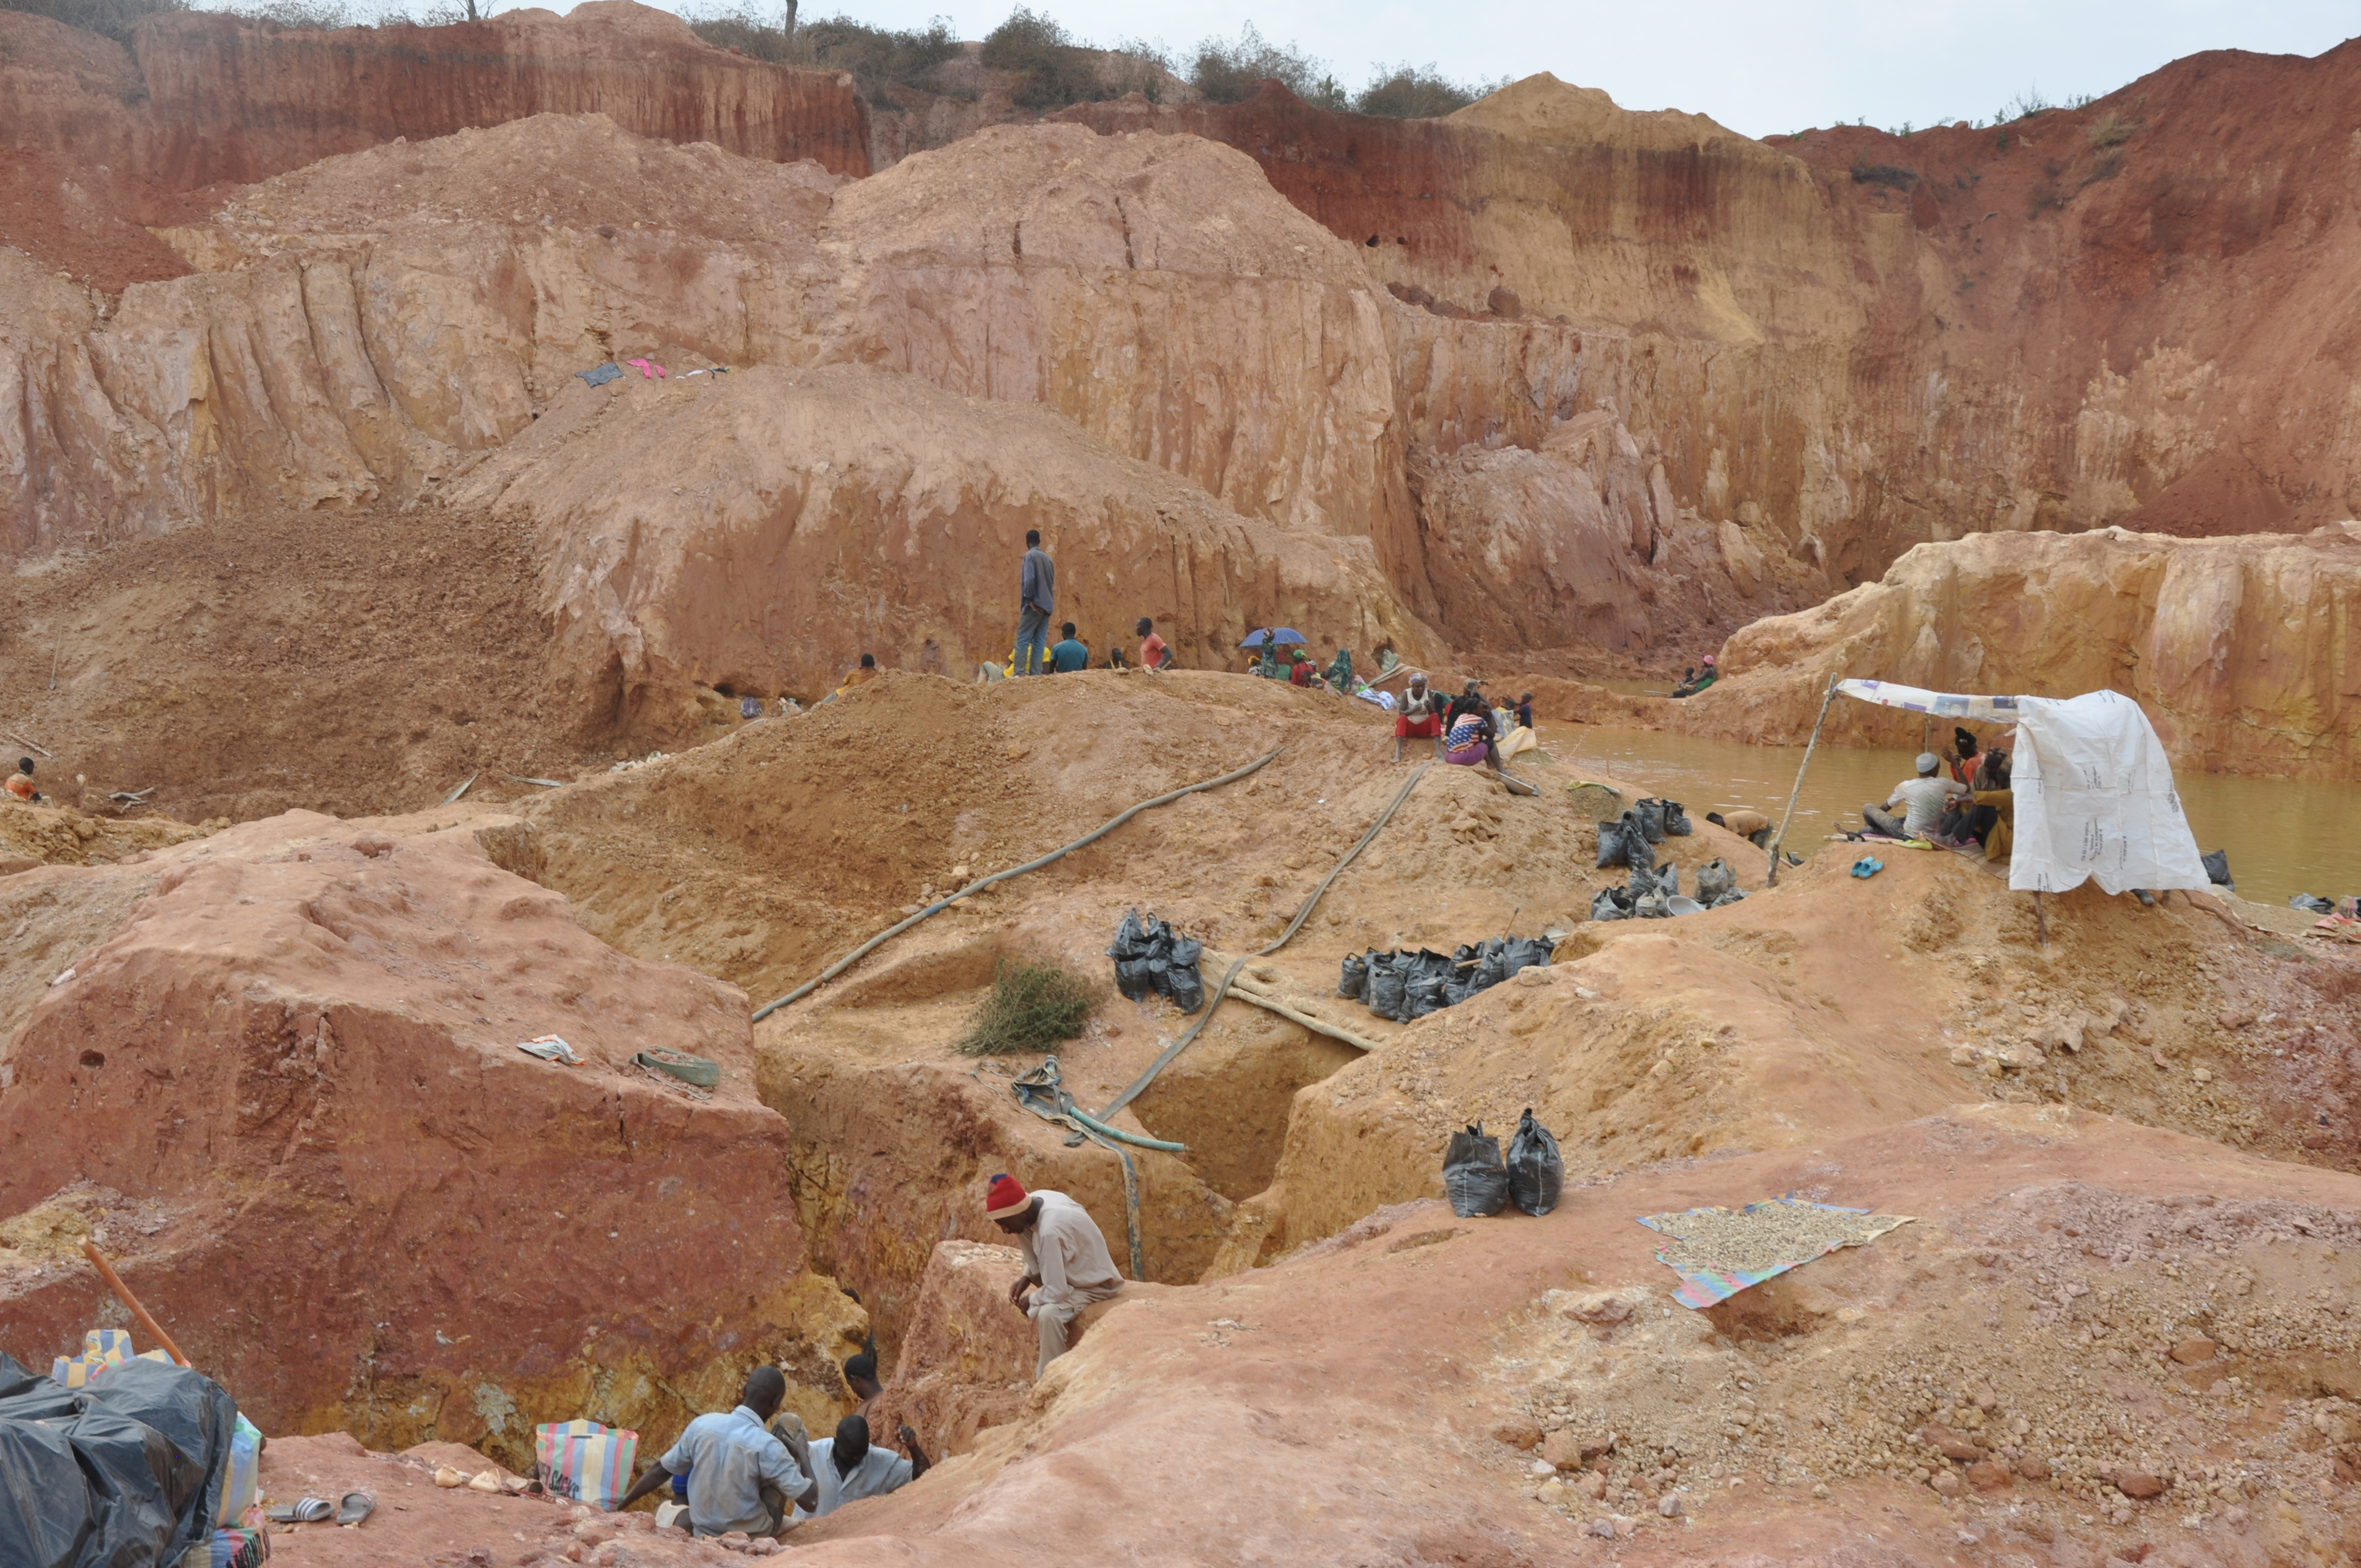 Chinese miners invade Cameroon, exploiting gold without authorization and causing deaths